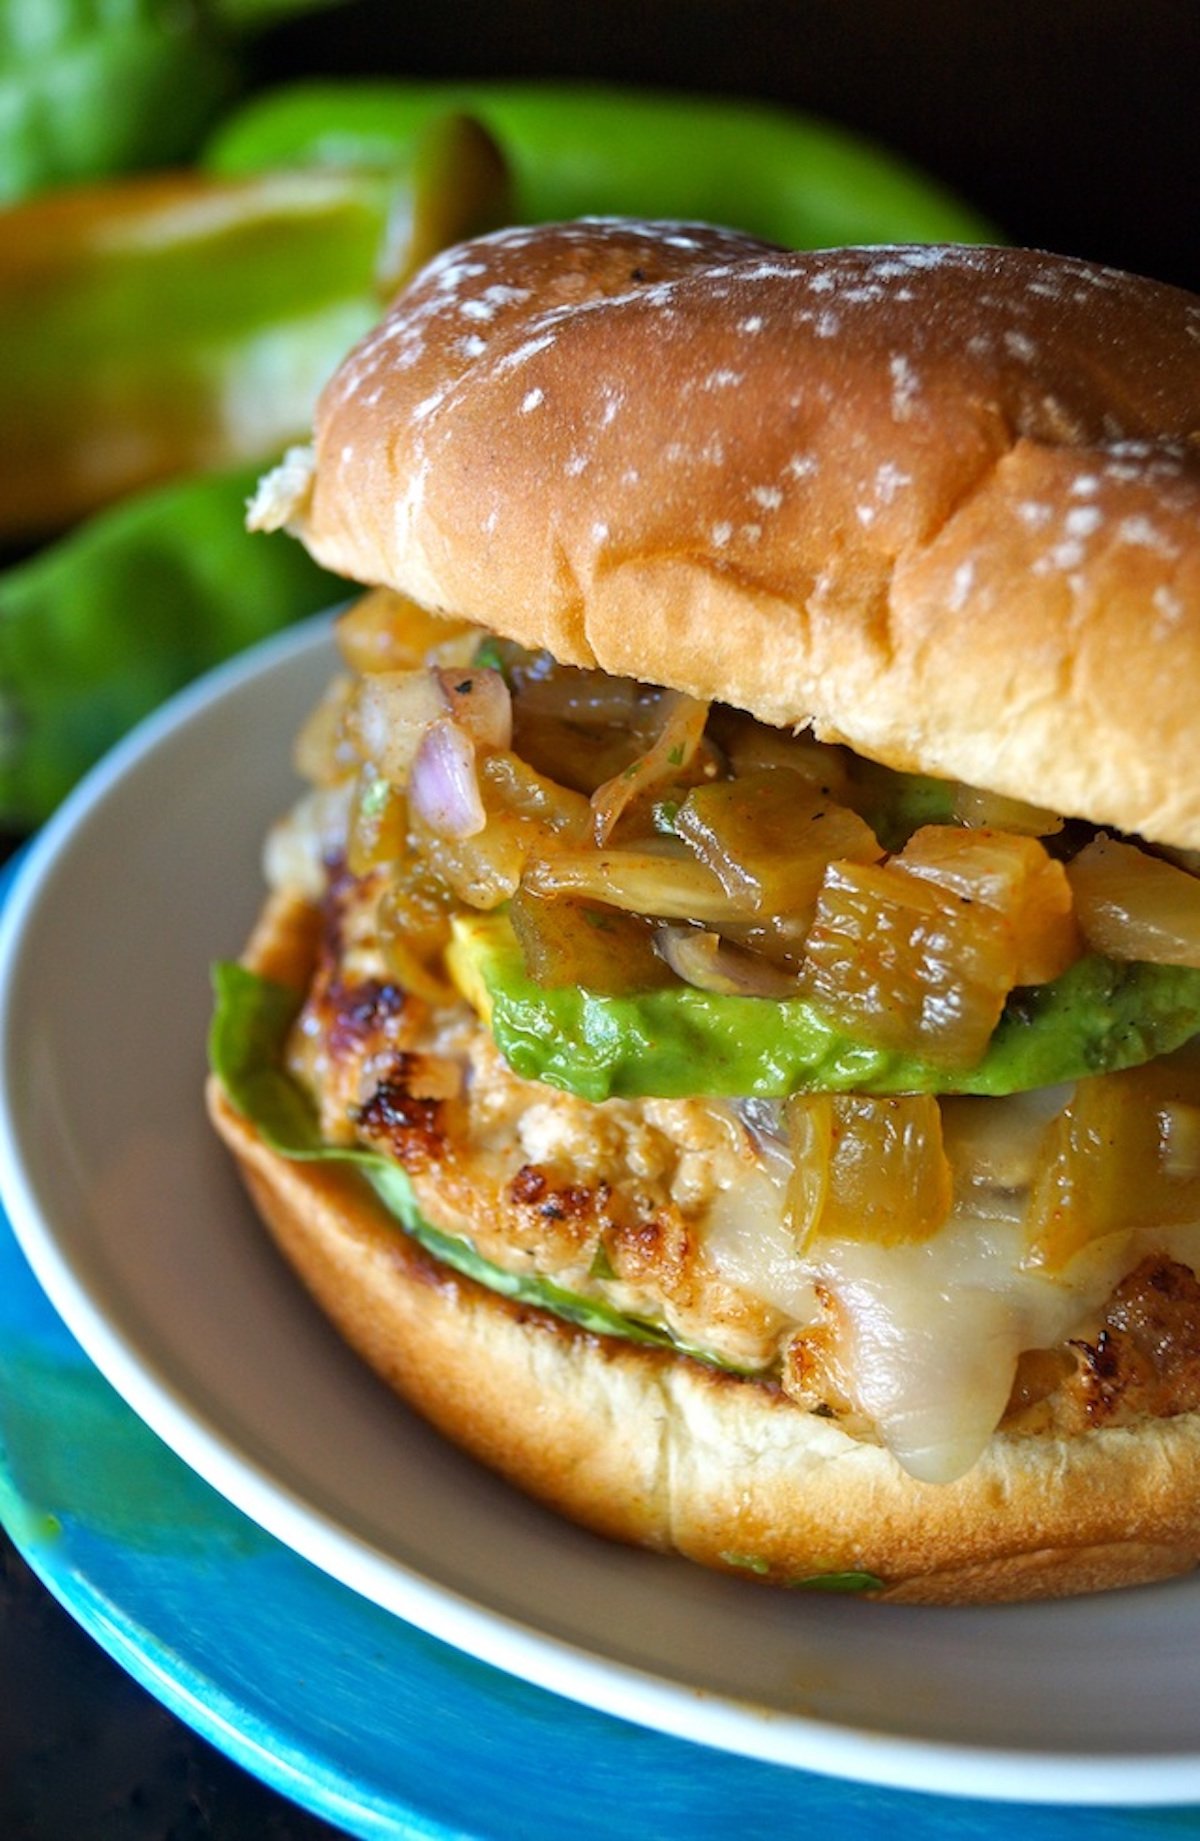 Big turkey burger filled with melting cheese and pineapple salsa.